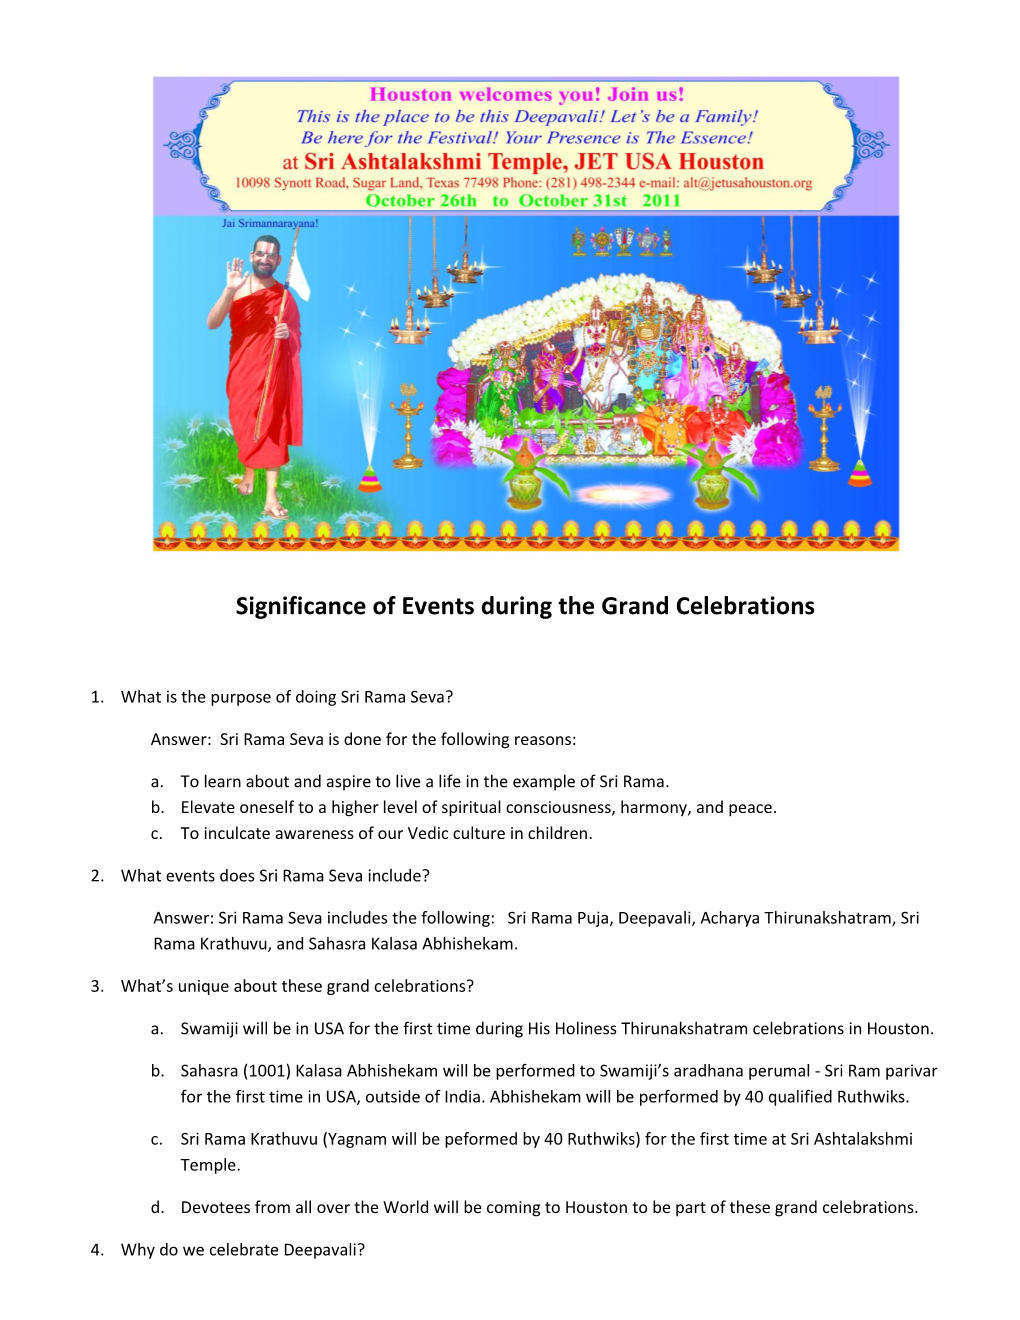 Significance of Events During the Grand Celebrations